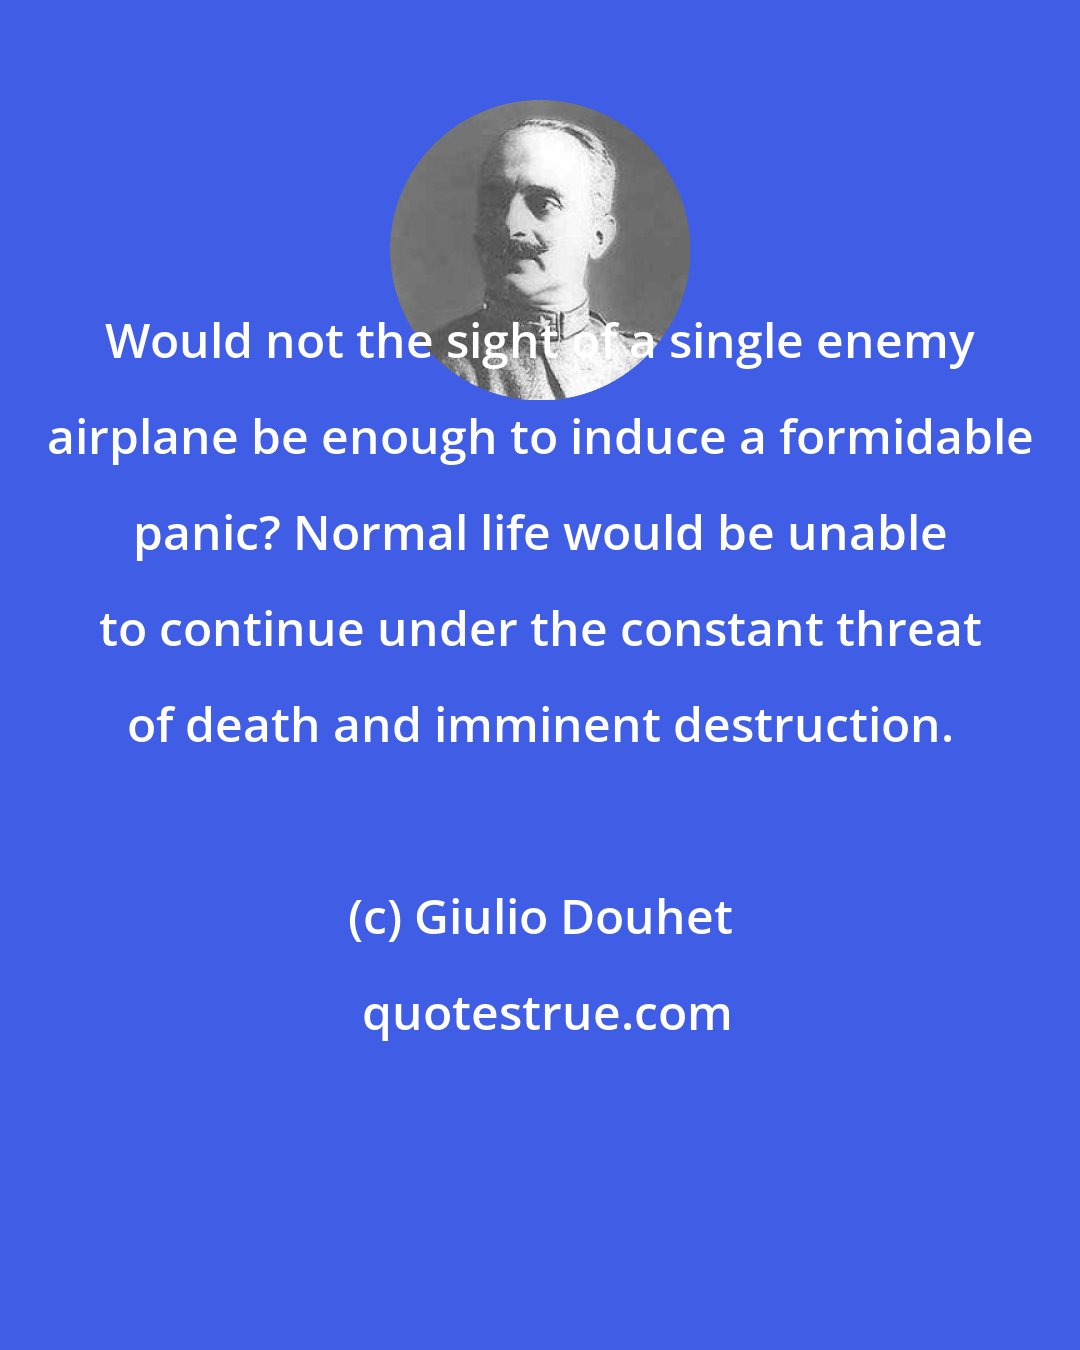 Giulio Douhet: Would not the sight of a single enemy airplane be enough to induce a formidable panic? Normal life would be unable to continue under the constant threat of death and imminent destruction.